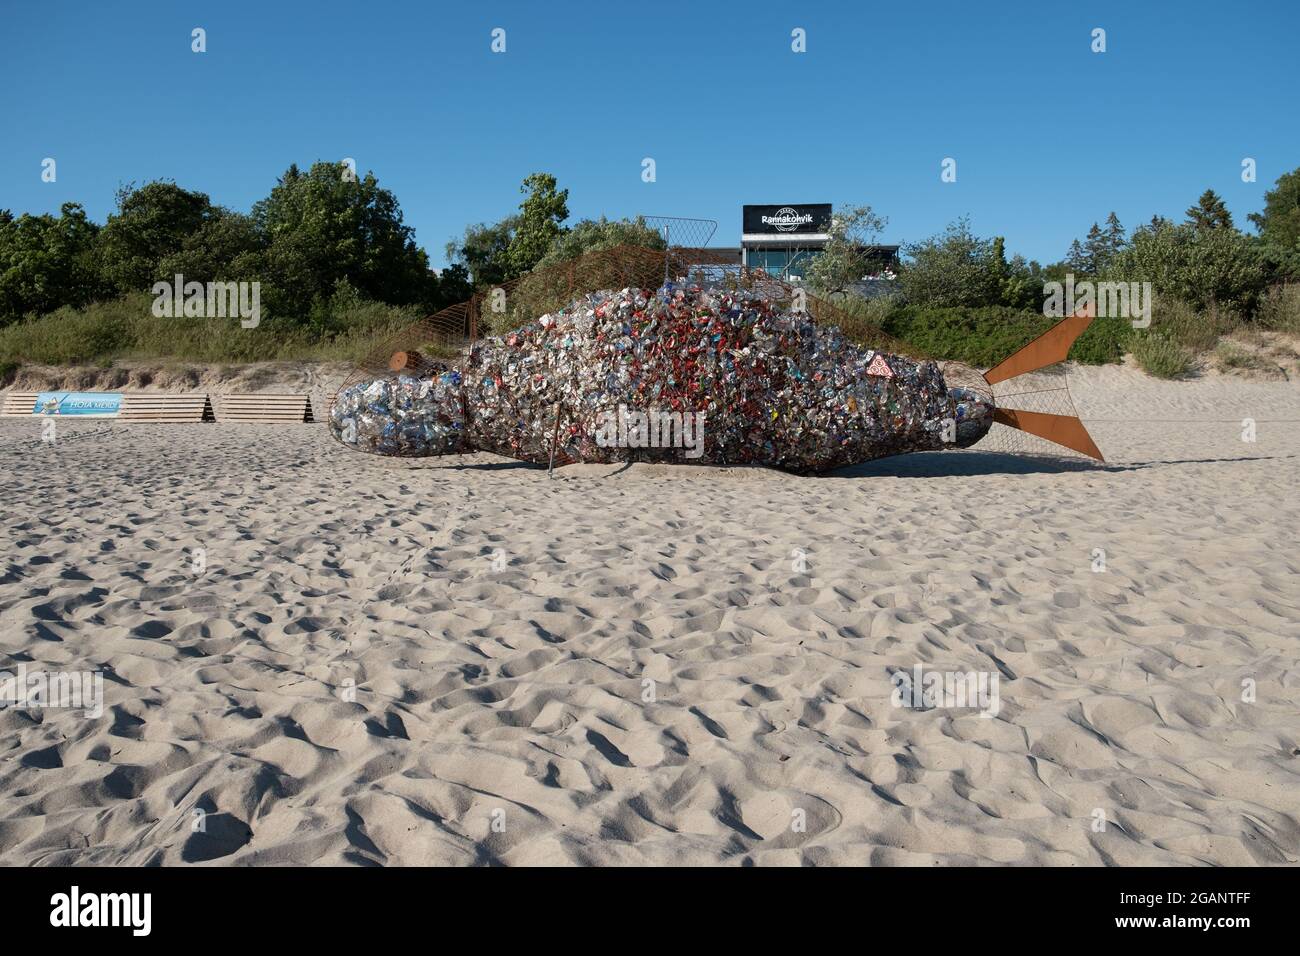 Pärnu, Estonia - July 11, 2021: Giant fish shaped wire trash container for collecting plastic waste on a clean beach. Stock Photo